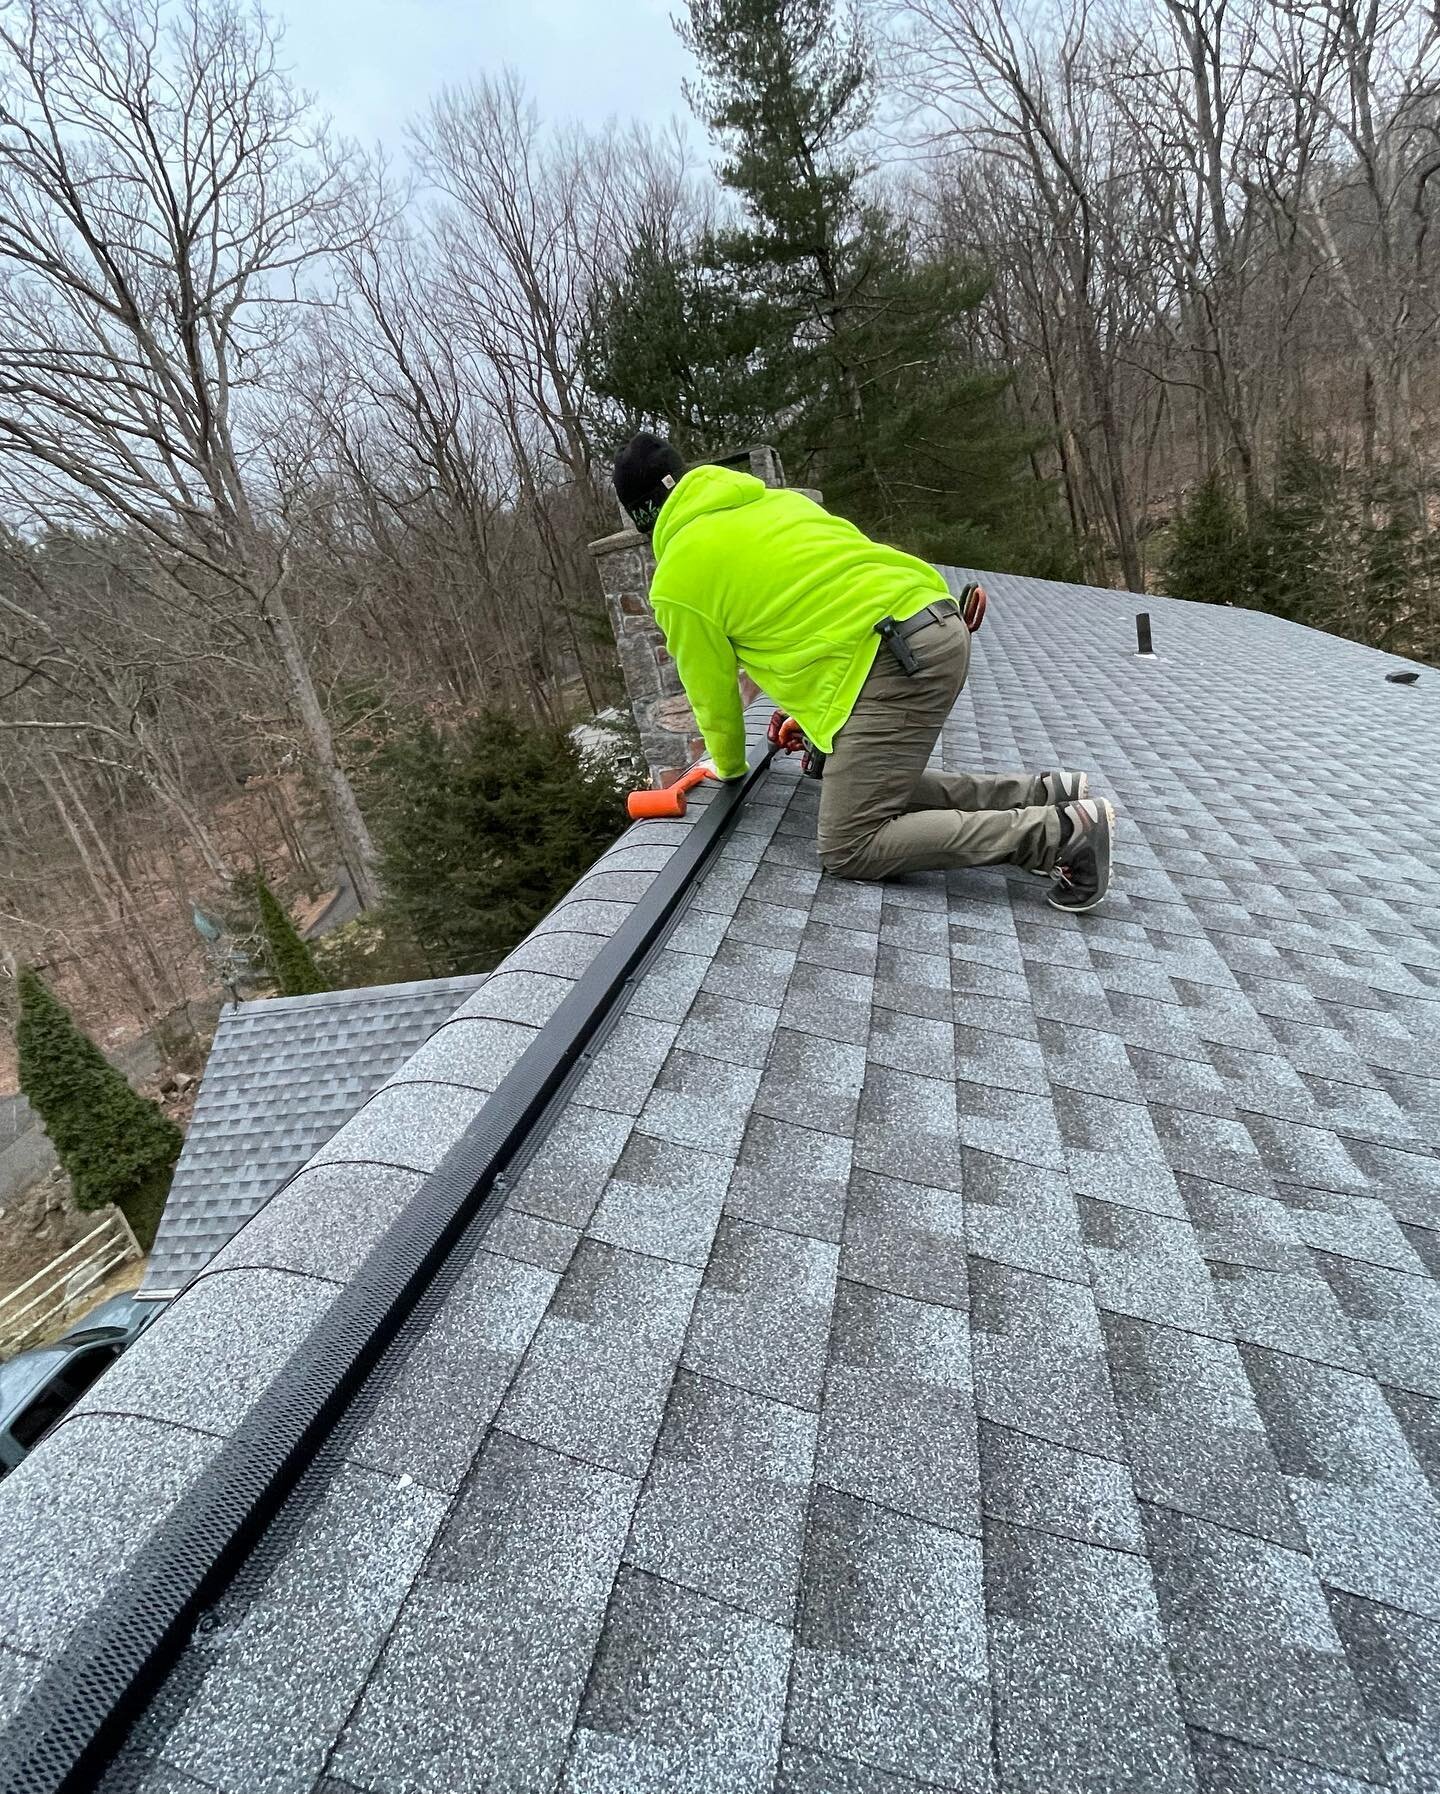 Another ridgeguard installed! Spring is booking up fast, call us today to set up an inspection to rid your home of nuisance wildlife! #nuisancewildlifetrapping #nuisancewildlife #nuisancewildlifecontrol #nuisancewildlifeservices #fairfieldcounty #fai